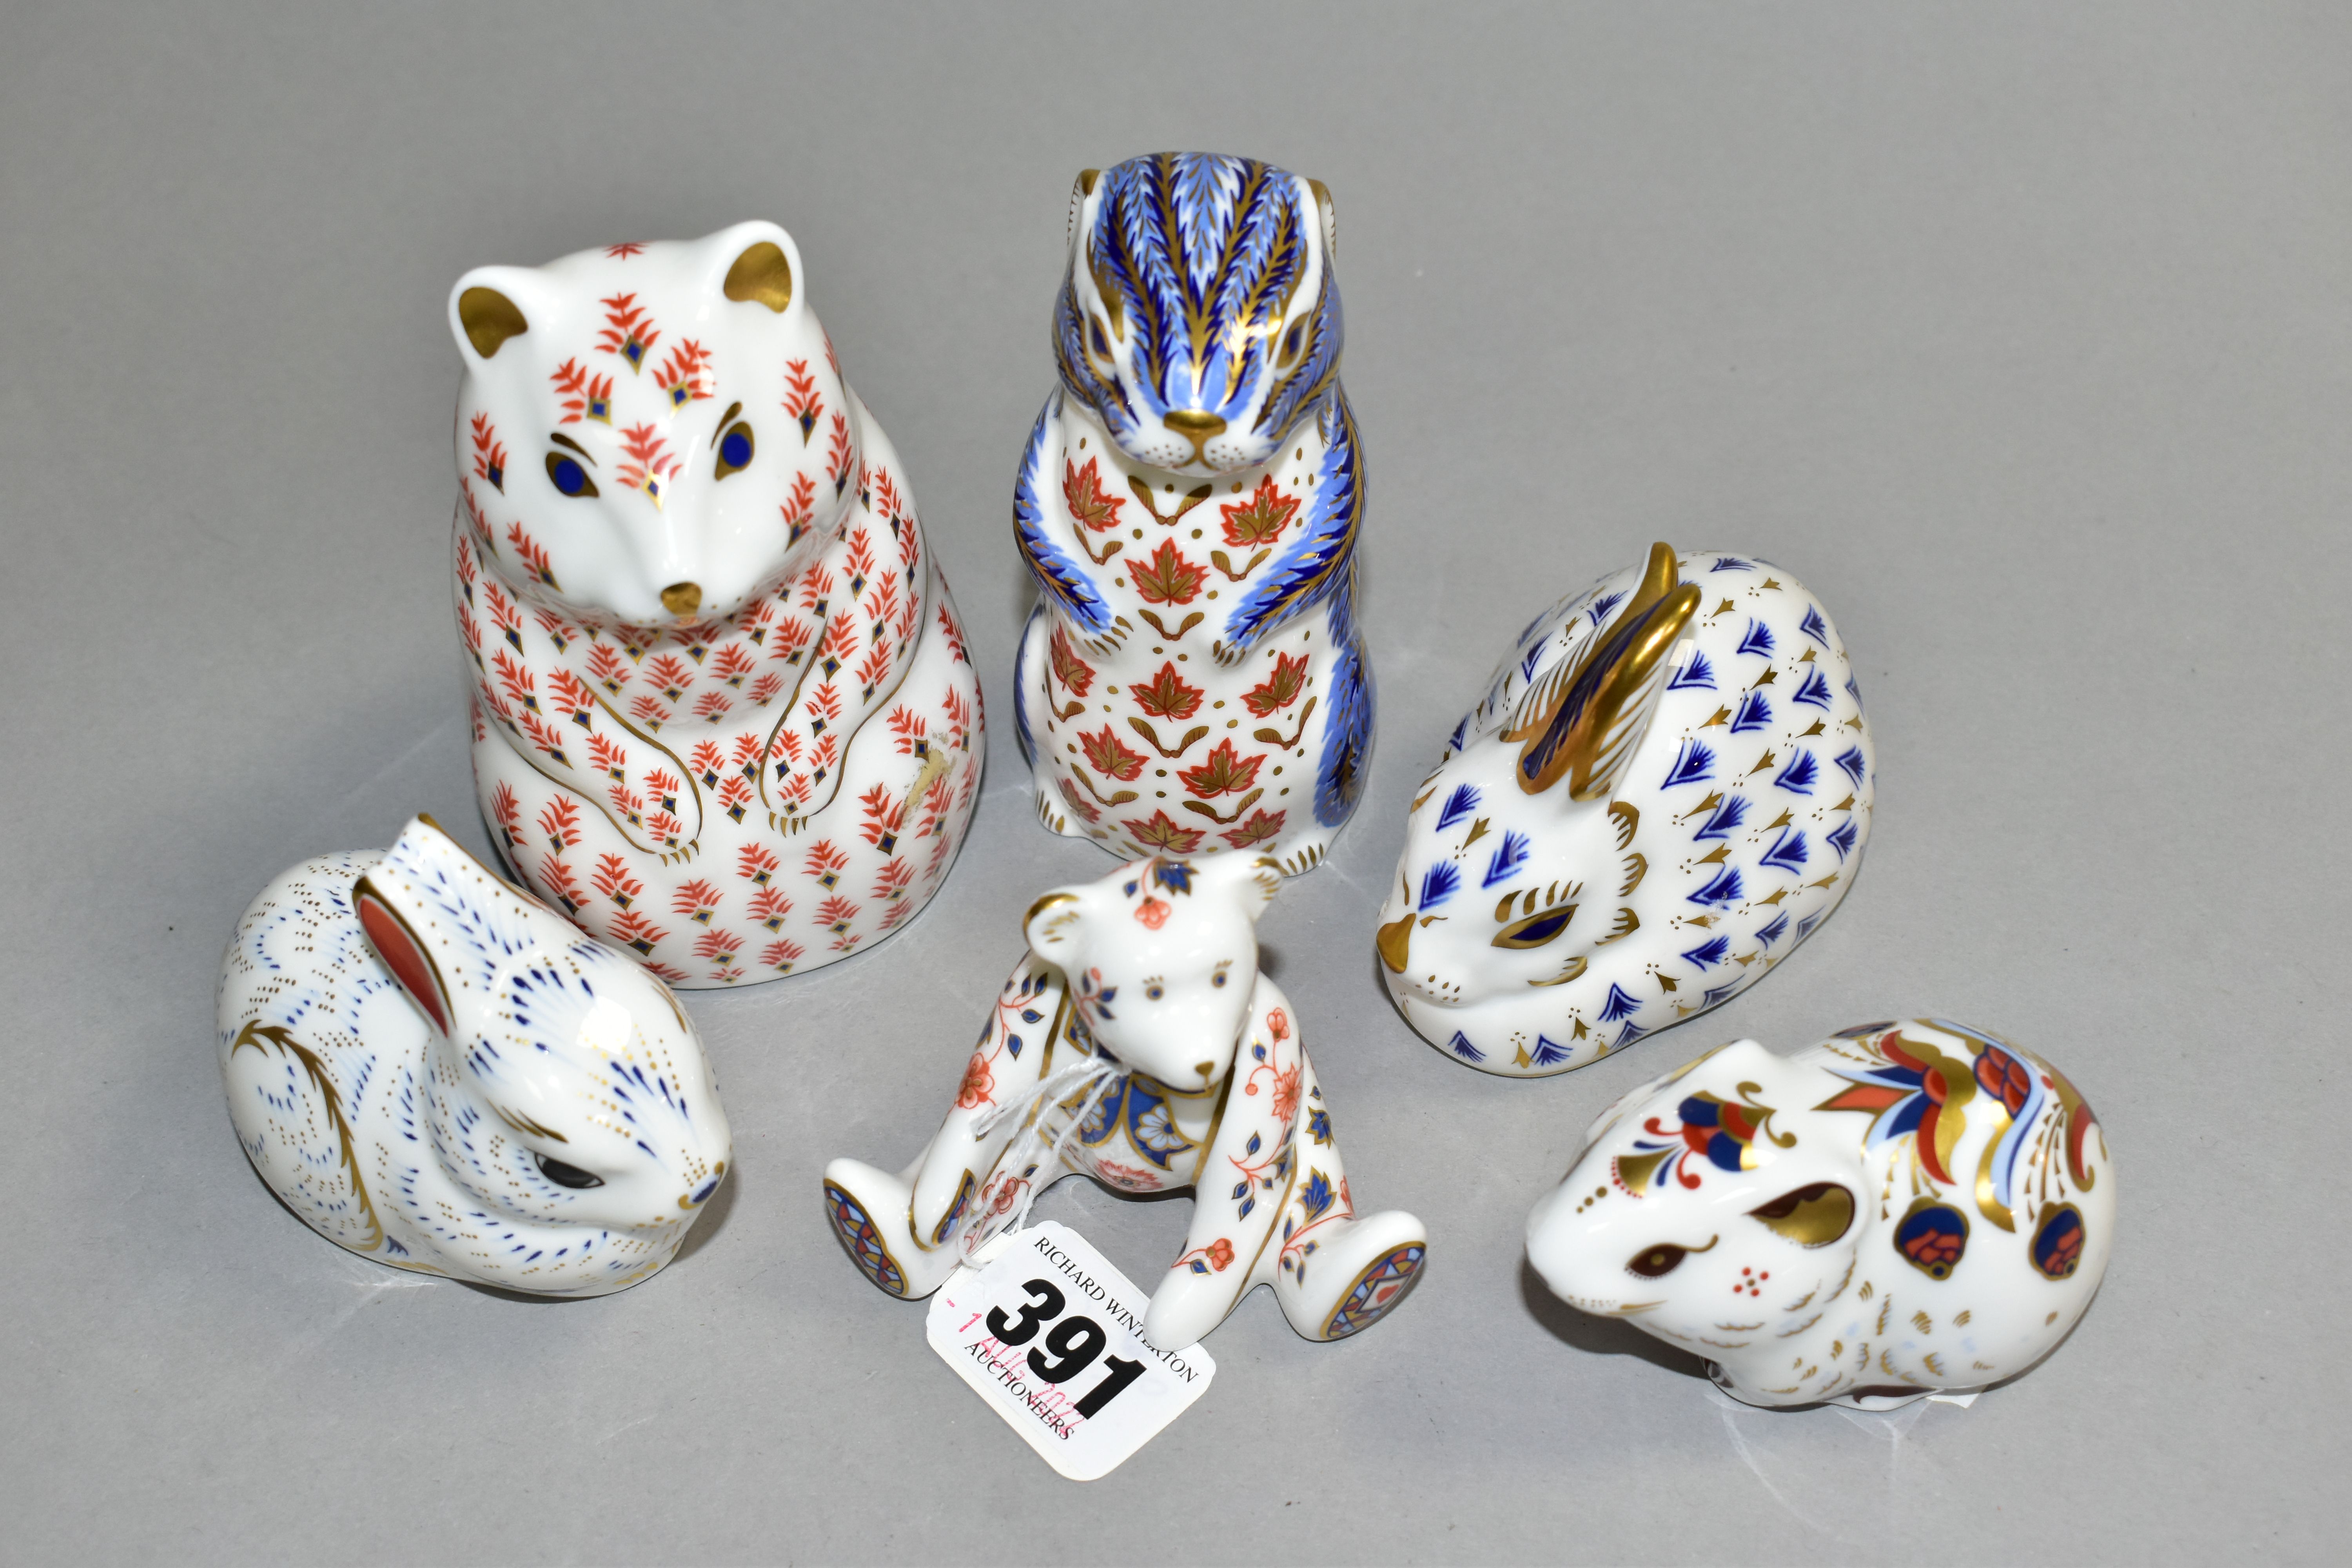 SIX ROYAL CROWN DERBY PAPERWEIGHTS, comprising Teddy Bear - William 1998, a collector's guild - Image 3 of 5